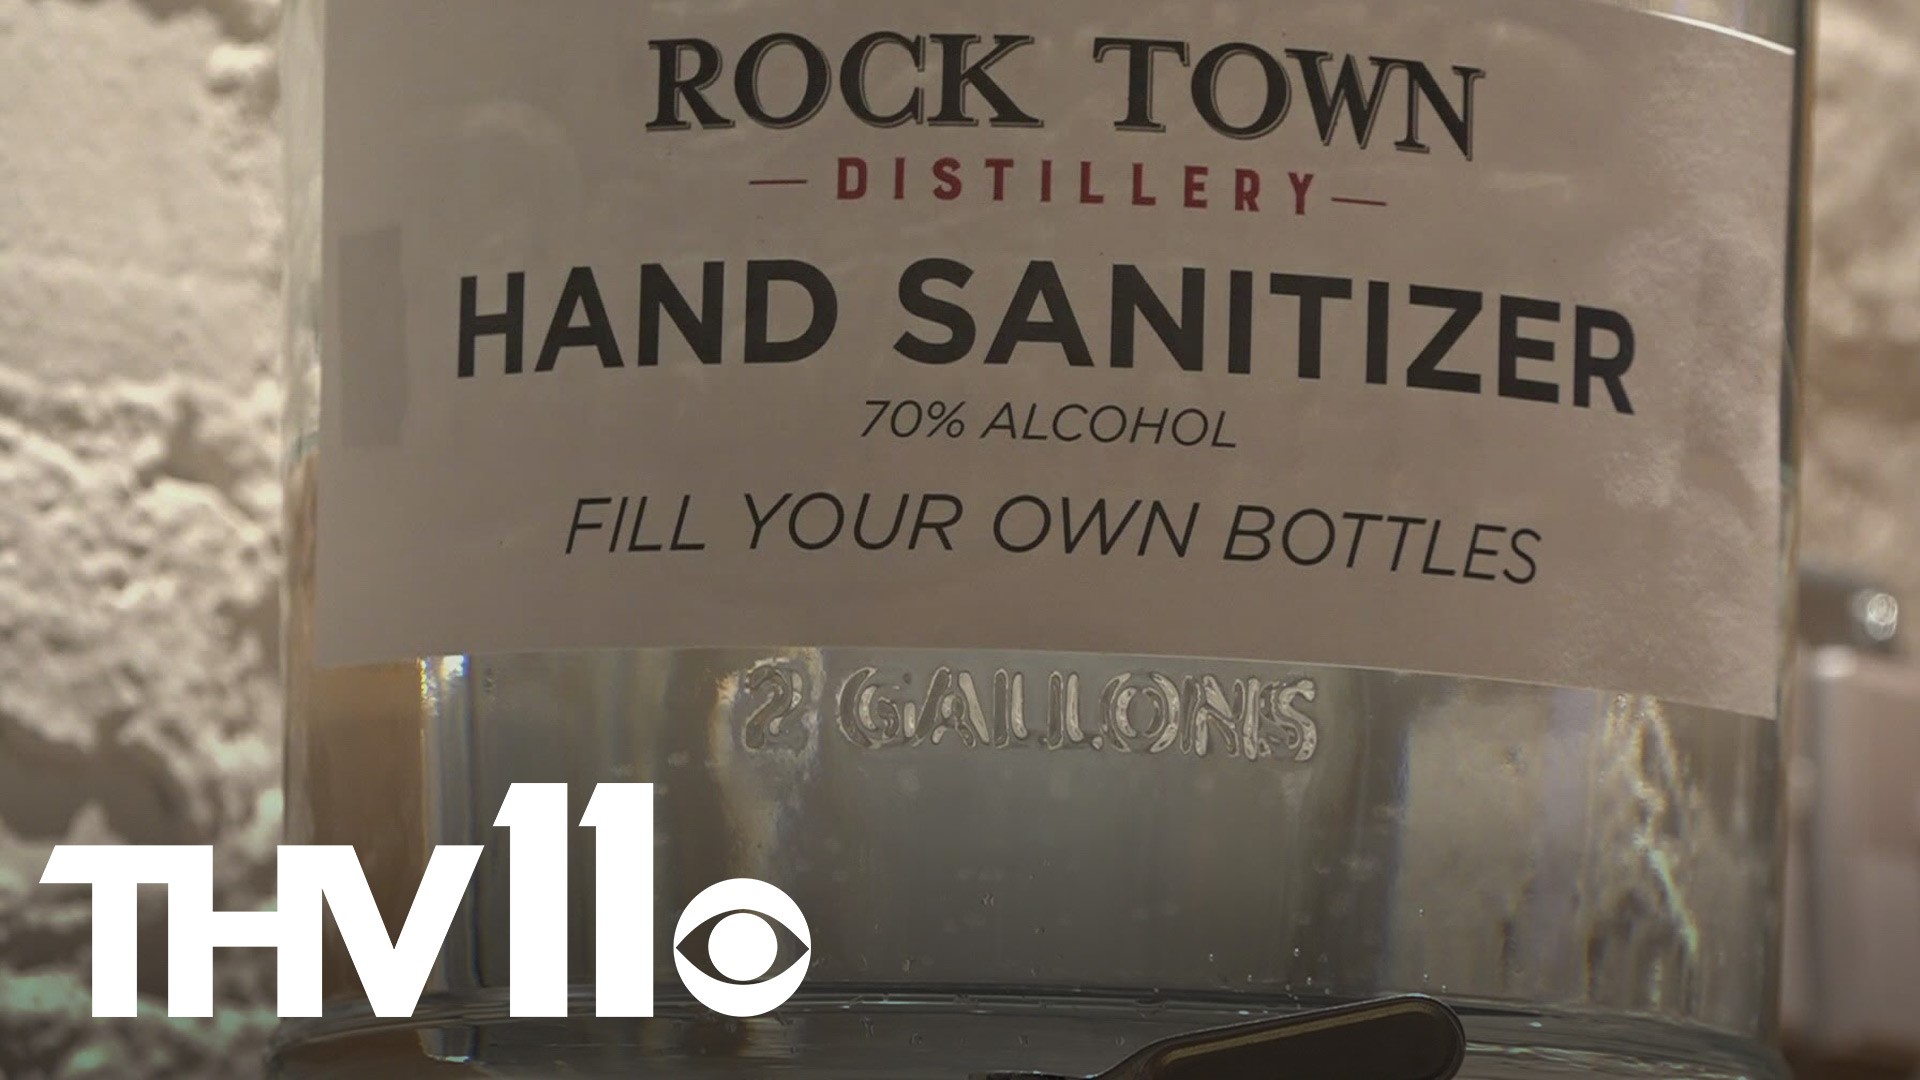 Many distilleries across America are faced with some expensive FDA fees after making hand sanitizer to help people during the COVID-19 pandemic.